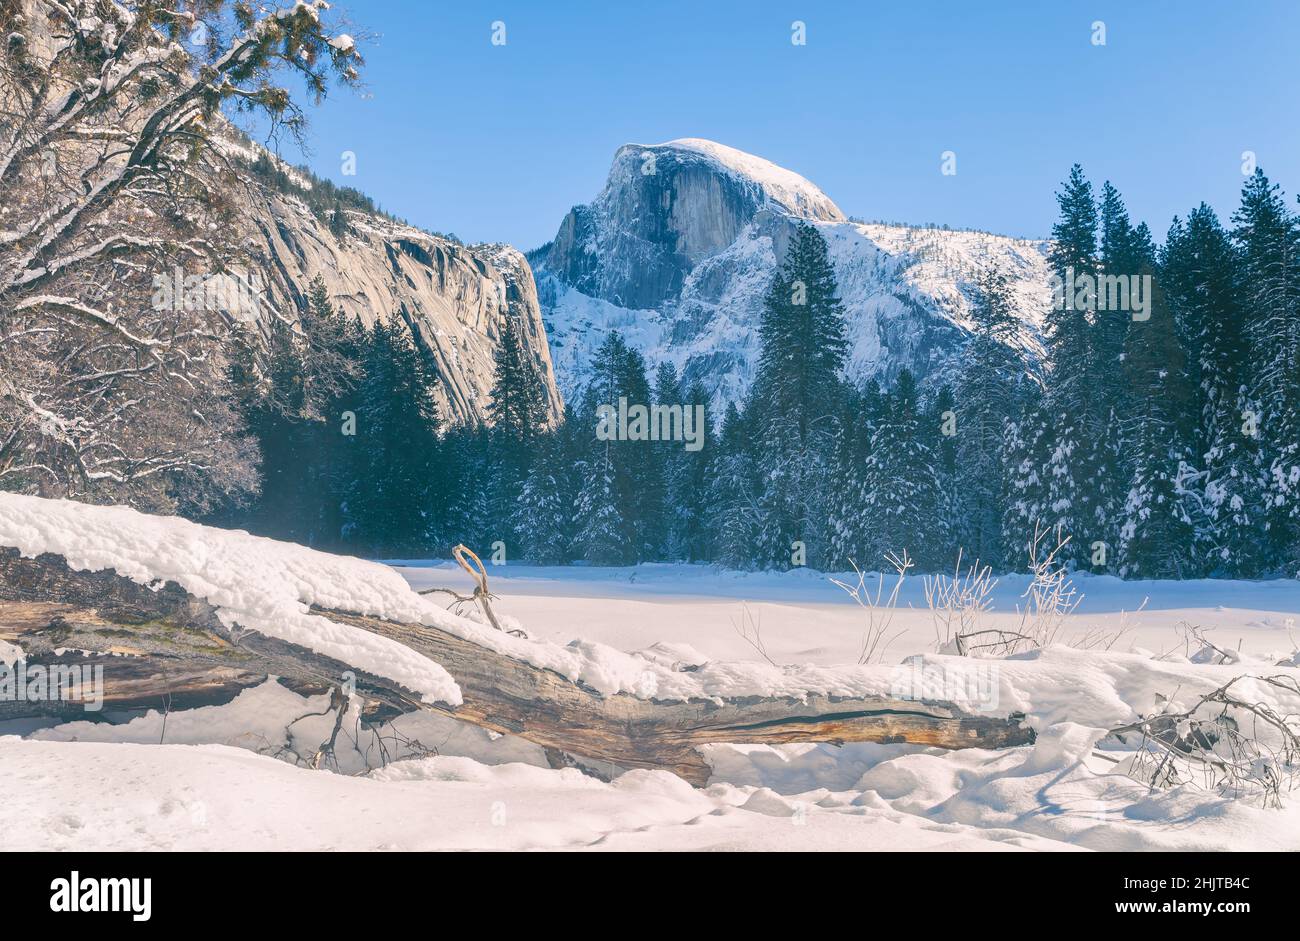 Cook Meadow covered with snow, with view of the iconic Half Dome Peak, in Yosemite National Park, California, USA. Stock Photo